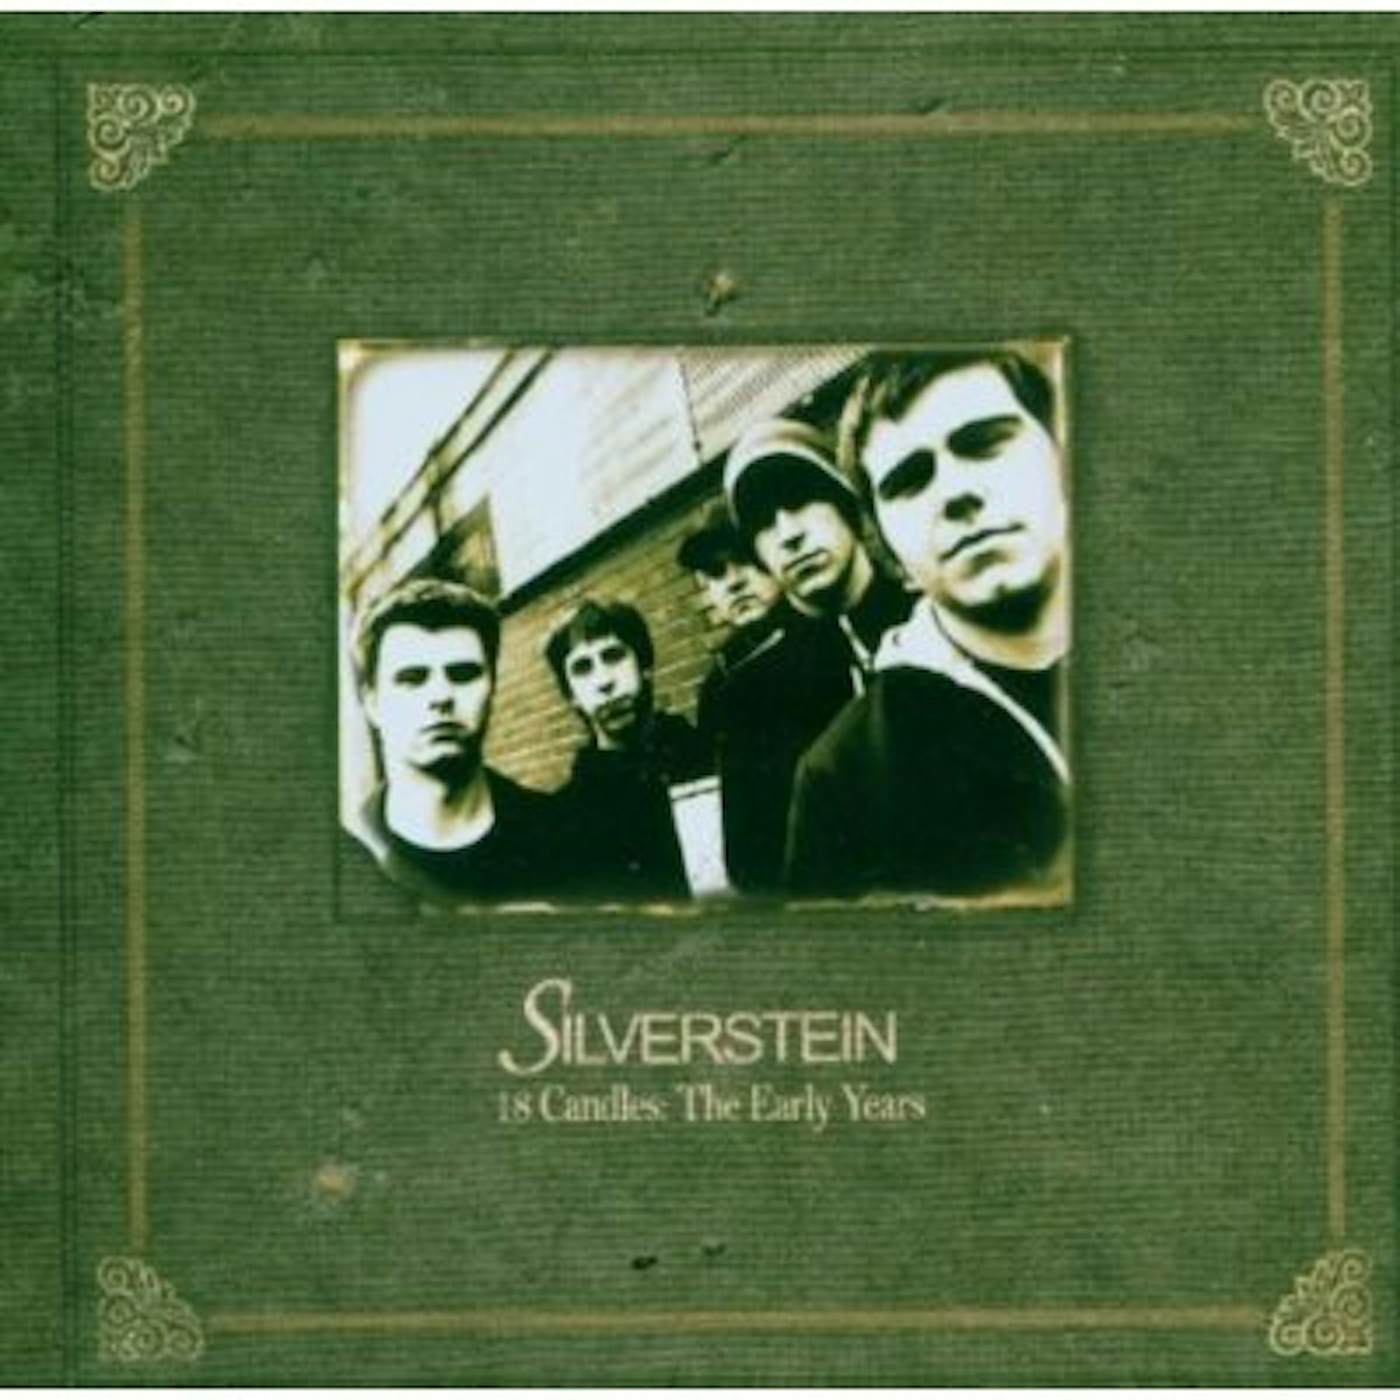 Silverstein 18 CANDLES: THE EARLY YEARS CD